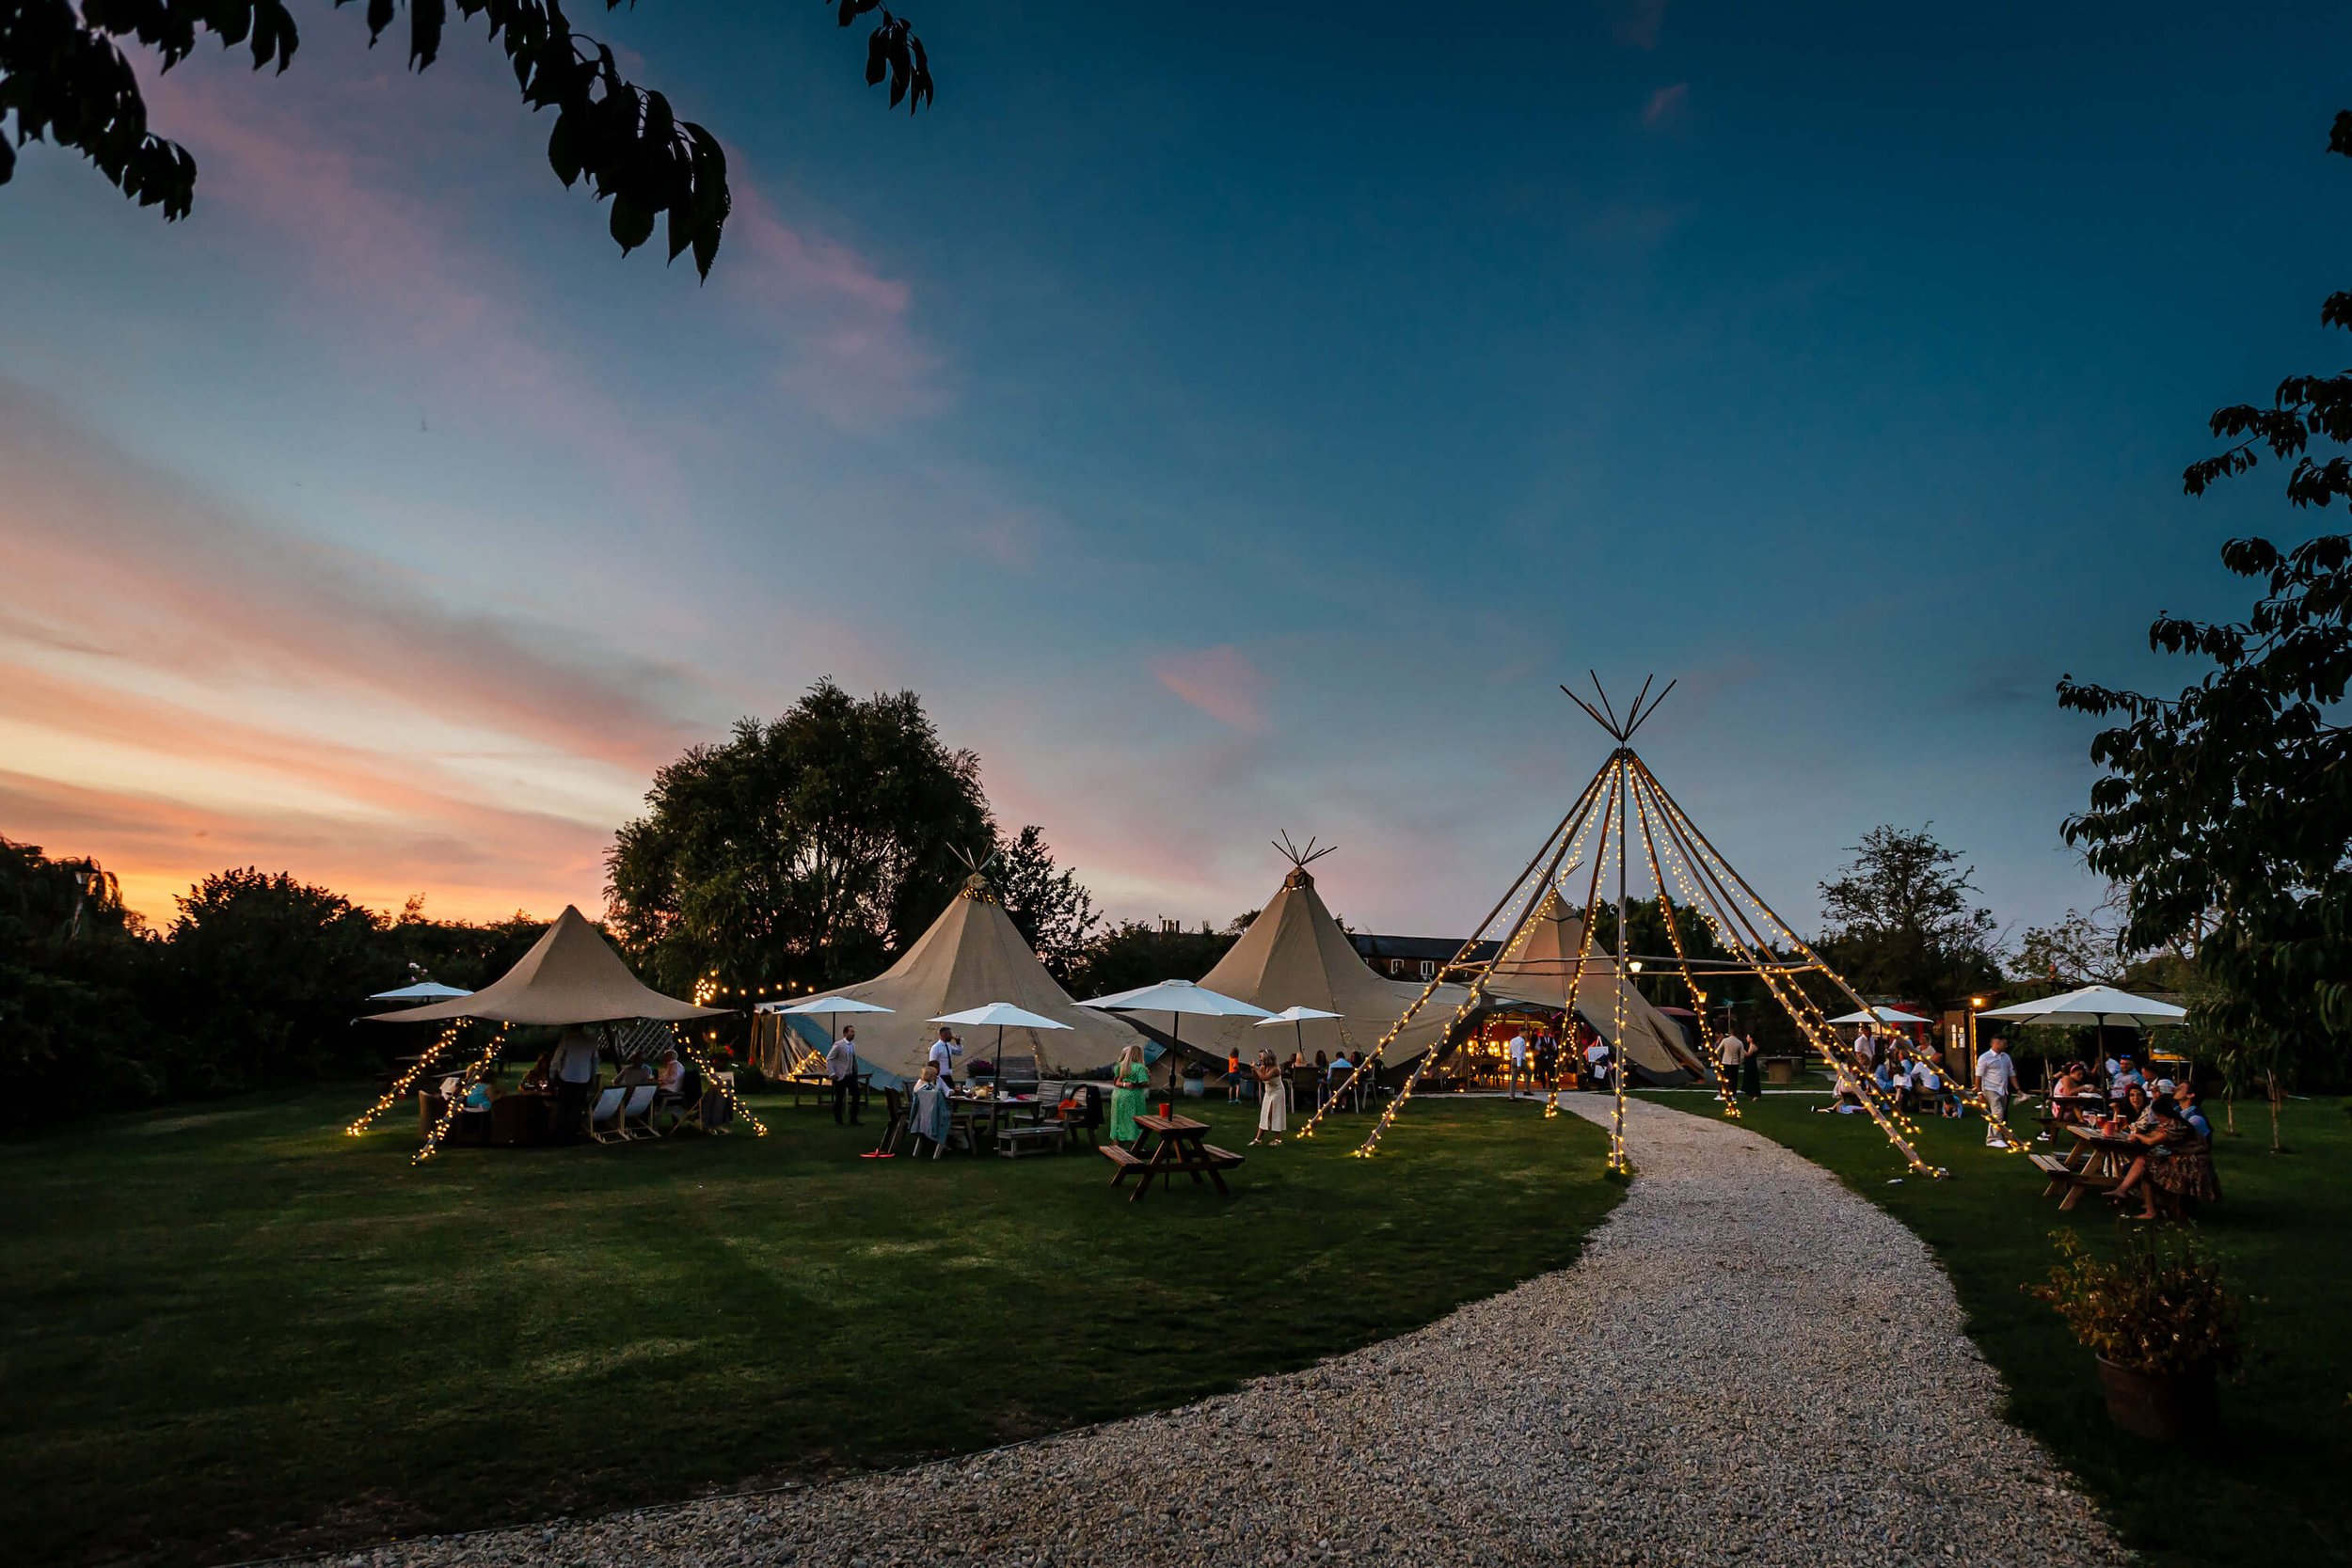 Evening shot of the grounds at Skipbridge Country Weddings